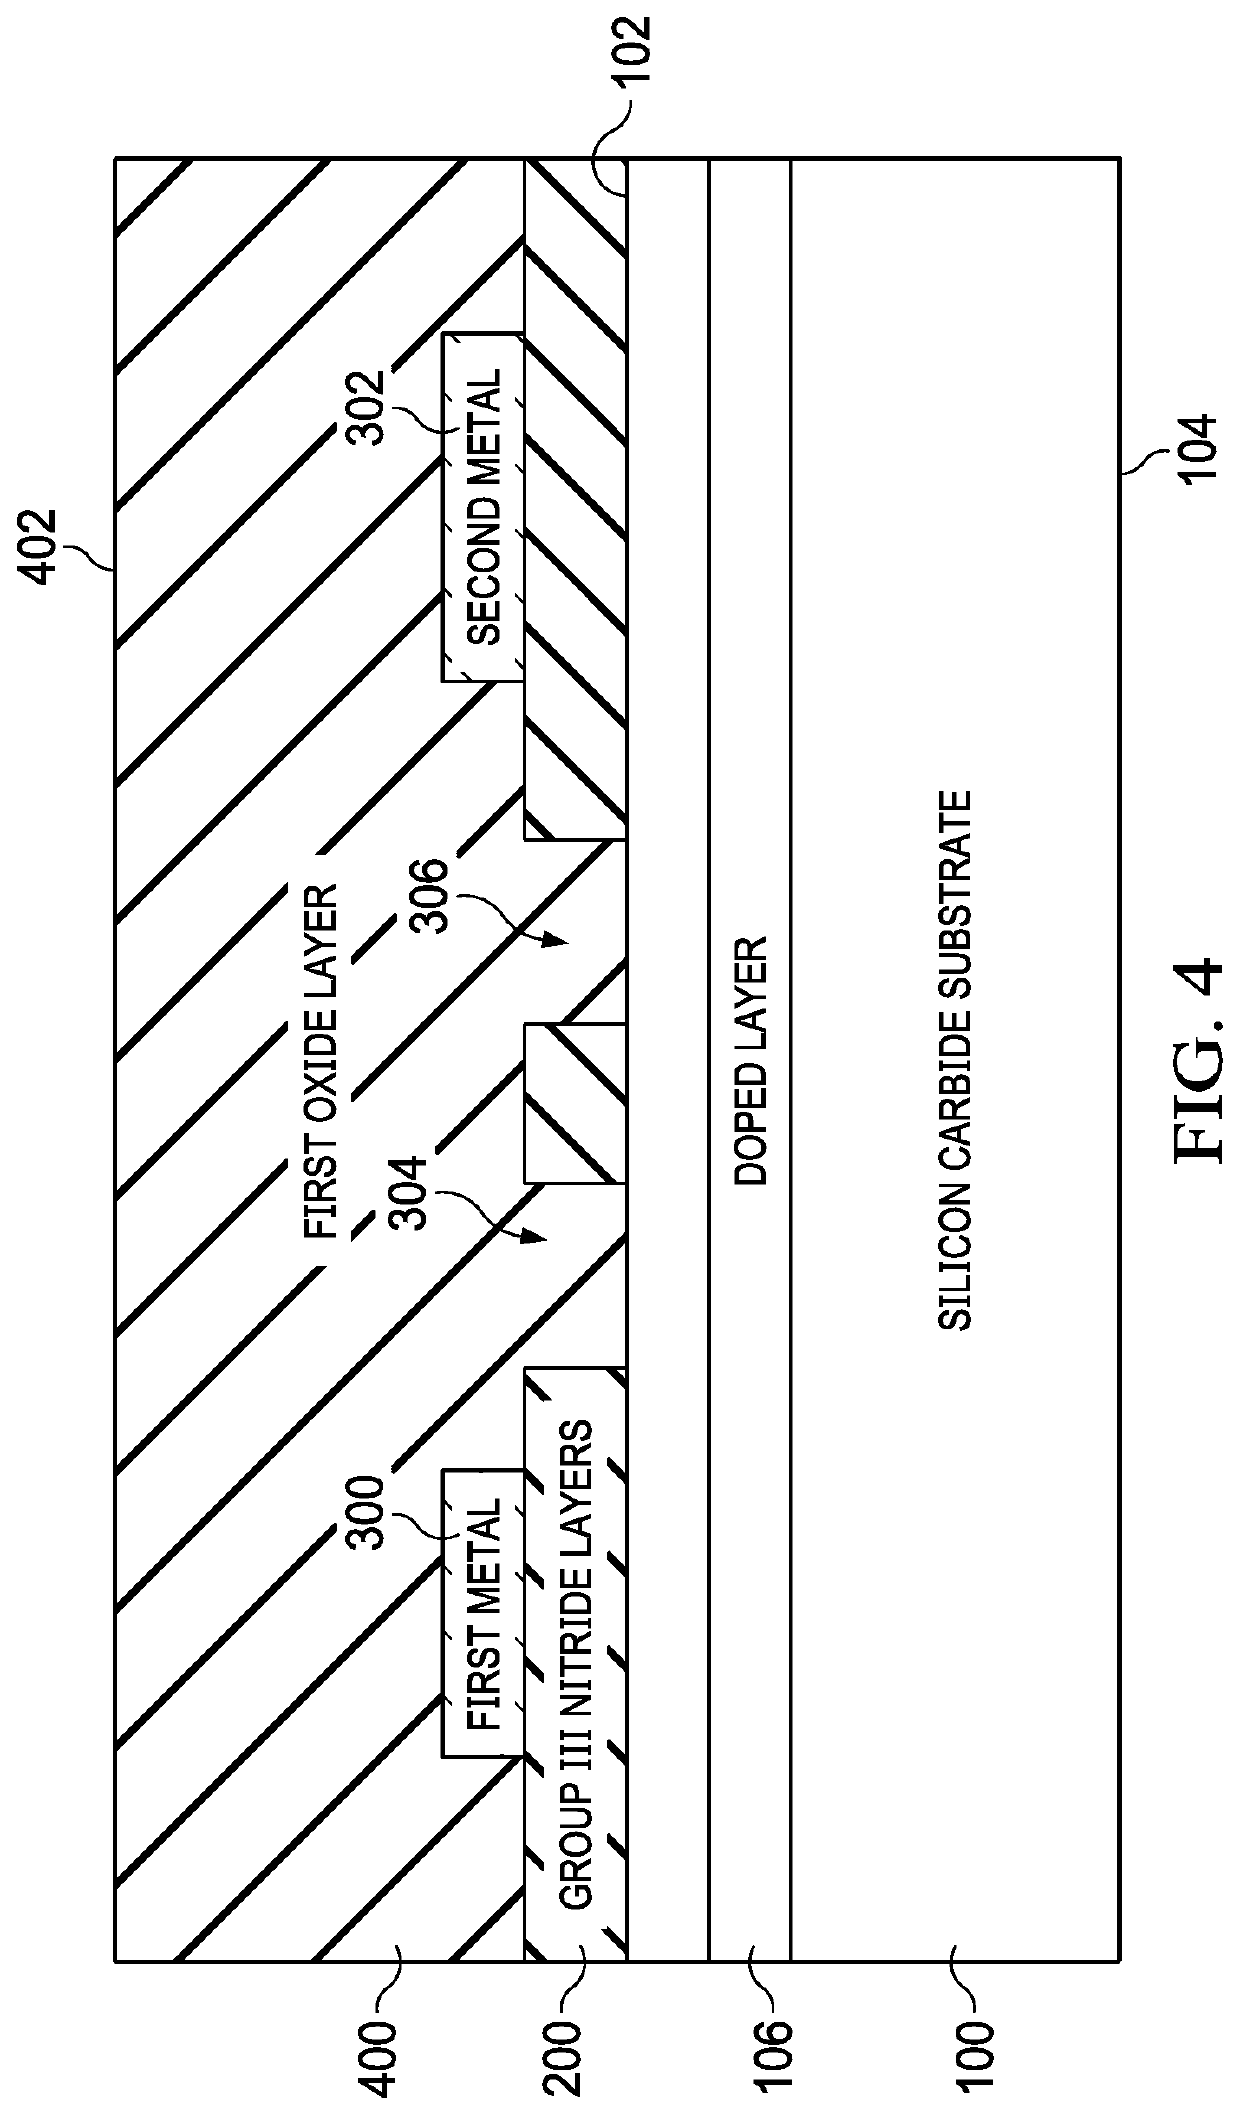 Fabricating a silicon carbide and nitride structures on a carrier substrate